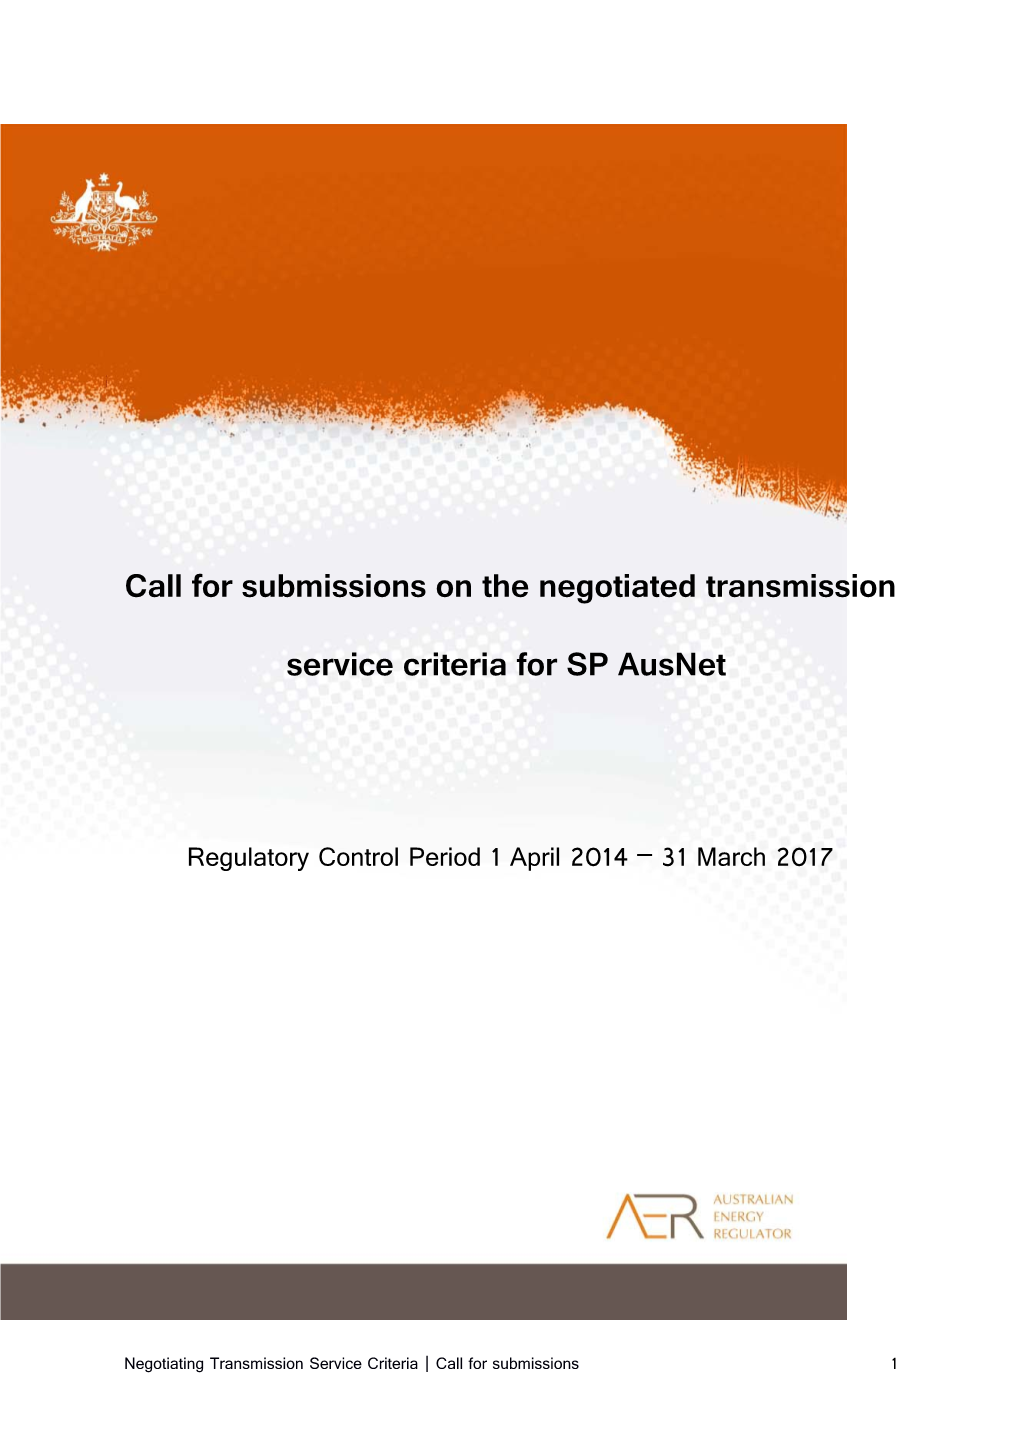 Call for Submissions on the Negotiated Transmission Service Criteria for SP Ausnet